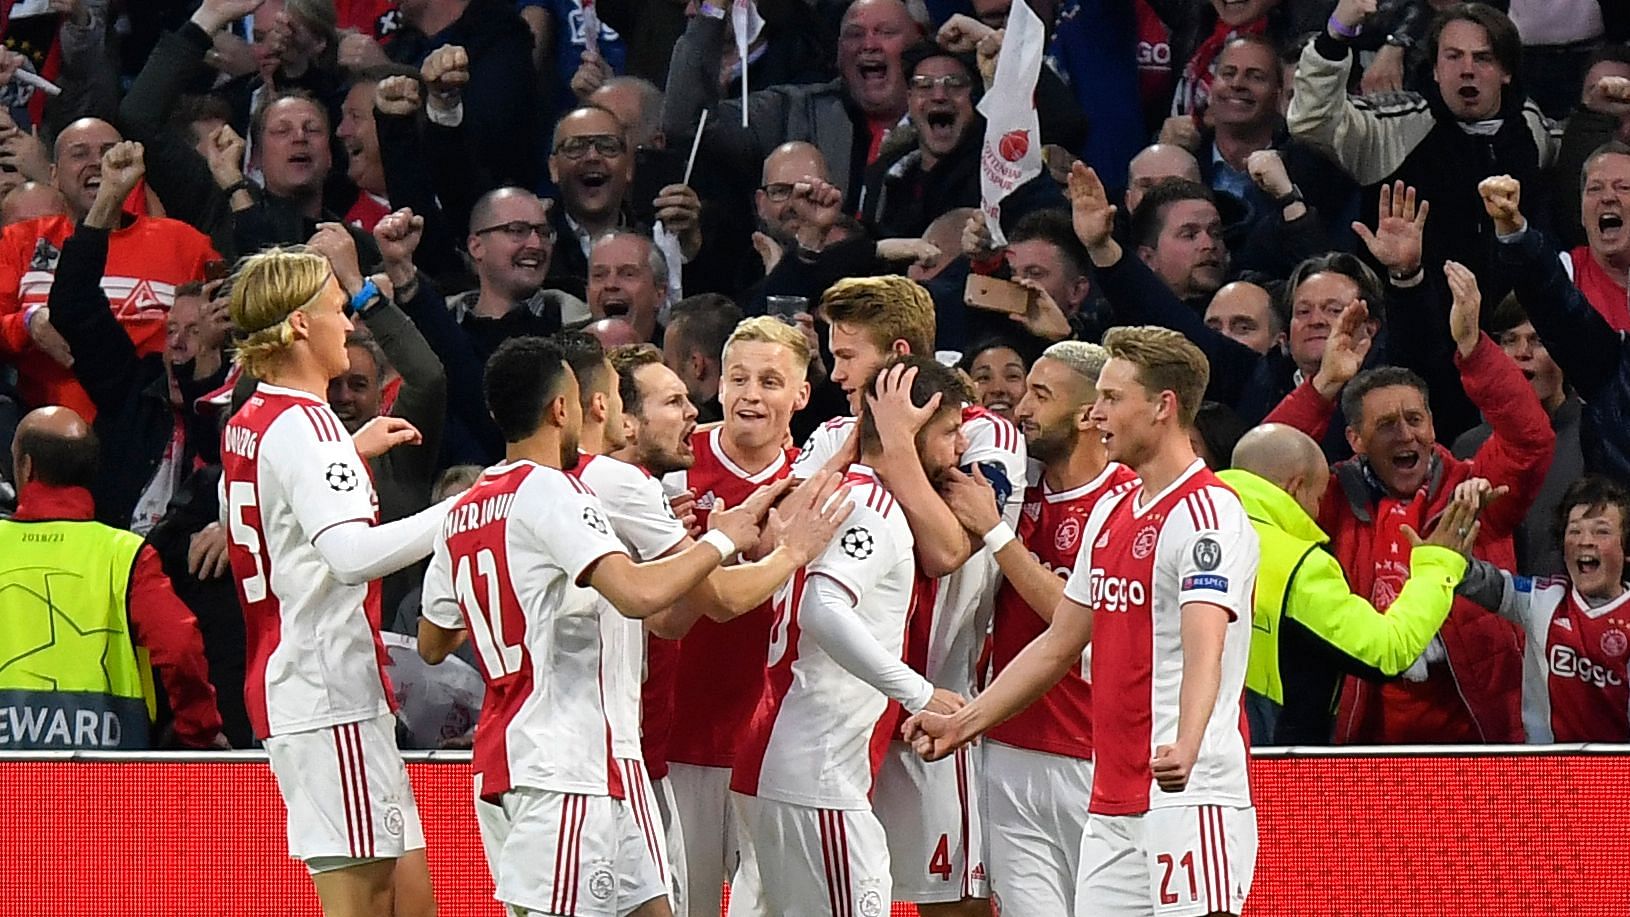 Ajax’s Matthijs de Ligt celebrates with teammates after scoring his side’s opening goal during the Champions League semifinal second leg soccer match between Ajax and Tottenham Hotspur.